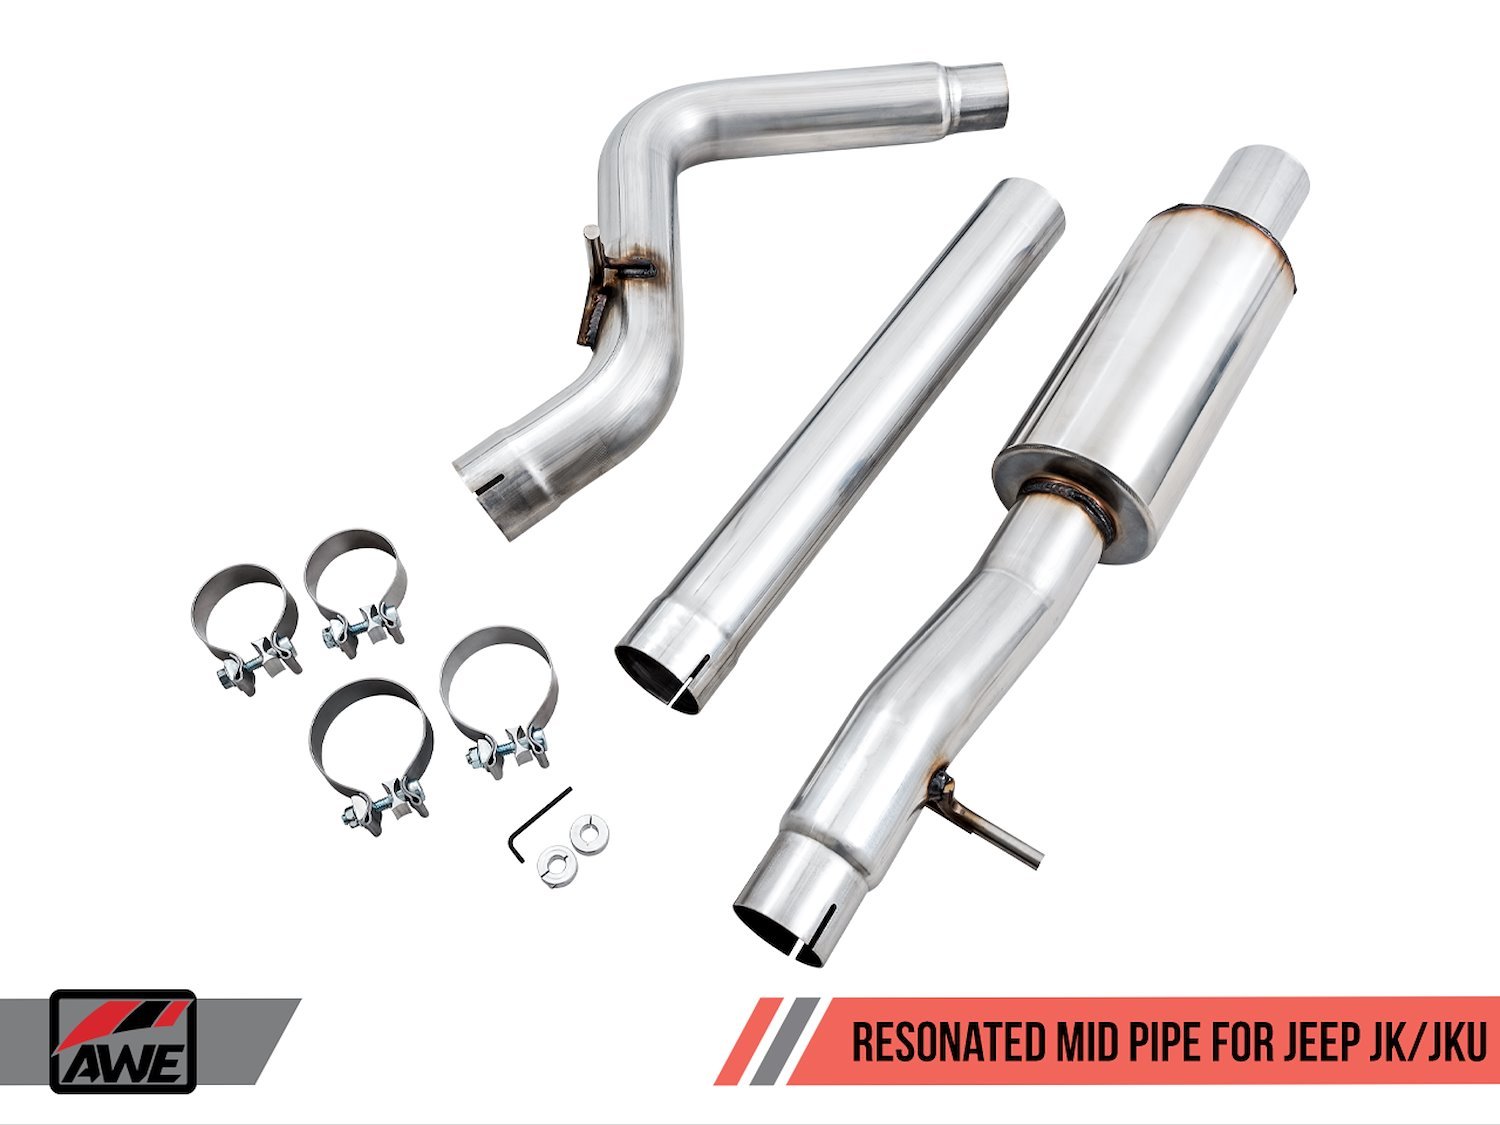 Resonated Mid Pipe for Jeep JK/JKU 3.6L